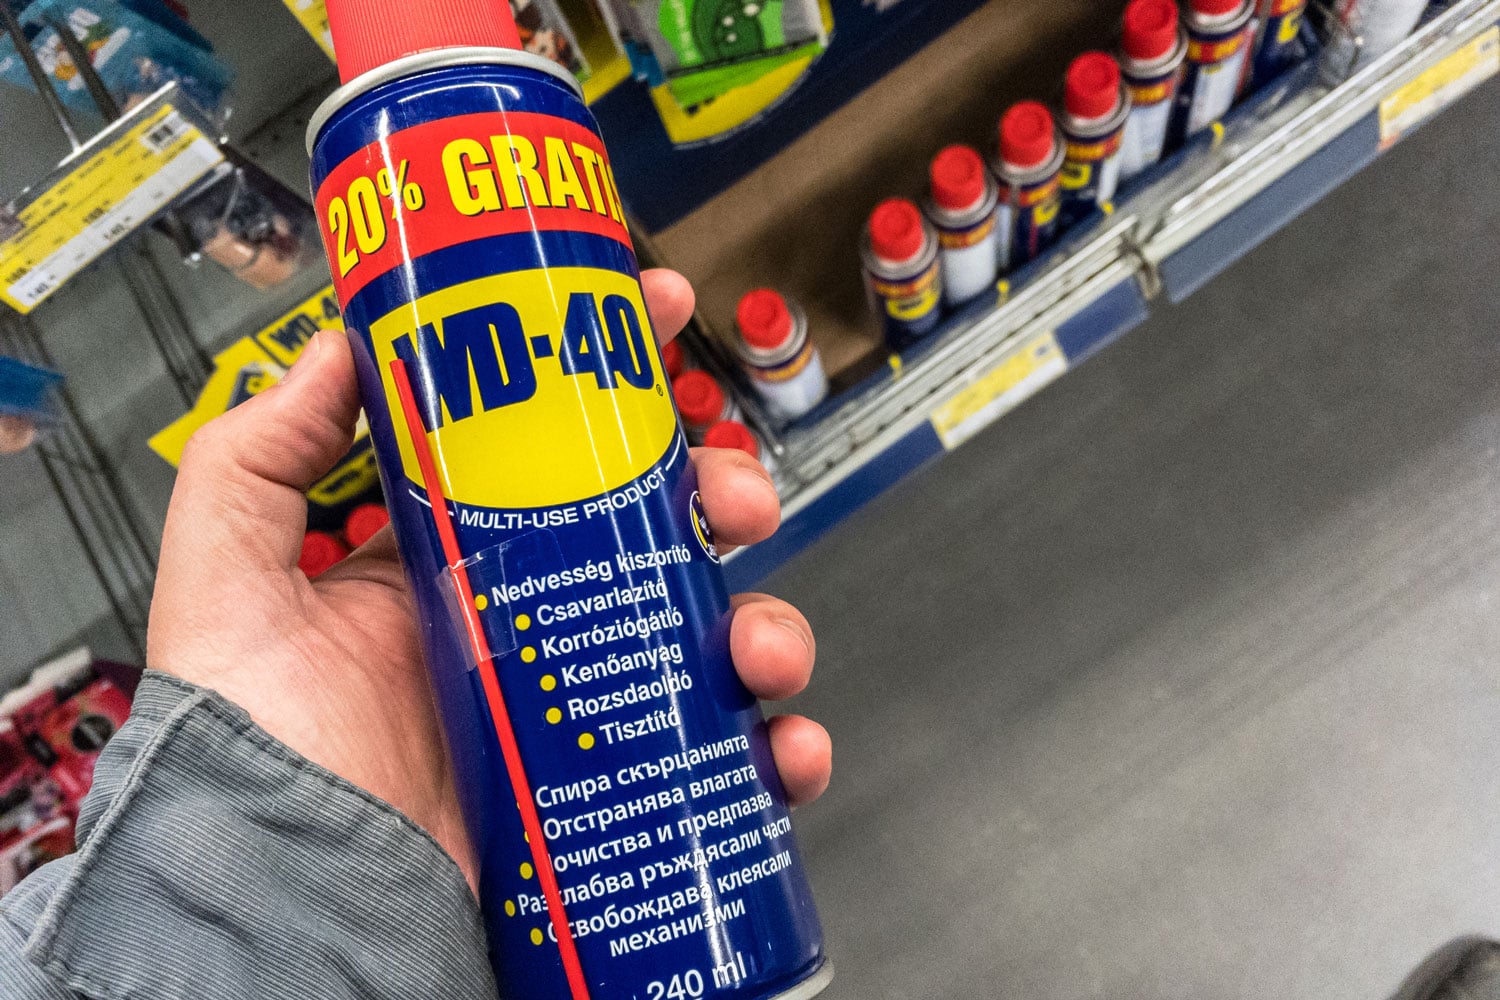 A man holding a WD-40 product on his hand